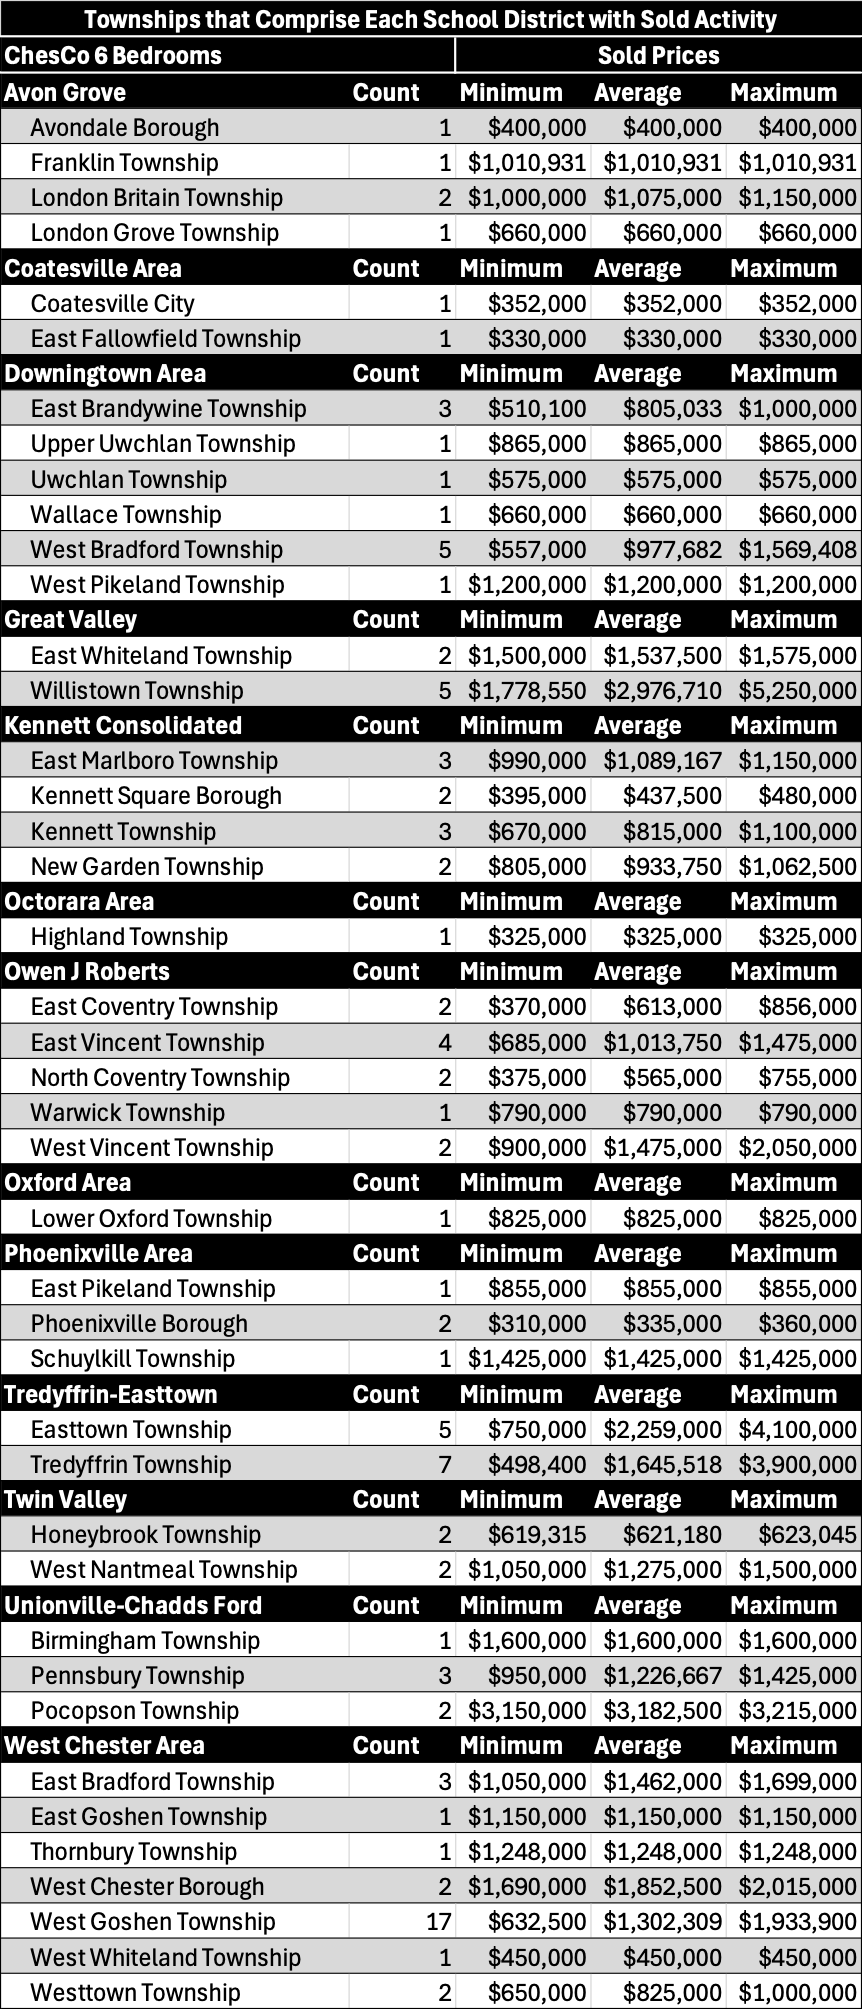 A table of each township within each School District in Chester County, PA for studios and 5 bedrooms or more, which includes the number of transactions and each township's corresponding sold prices displayed as minimum, average and maximum. 